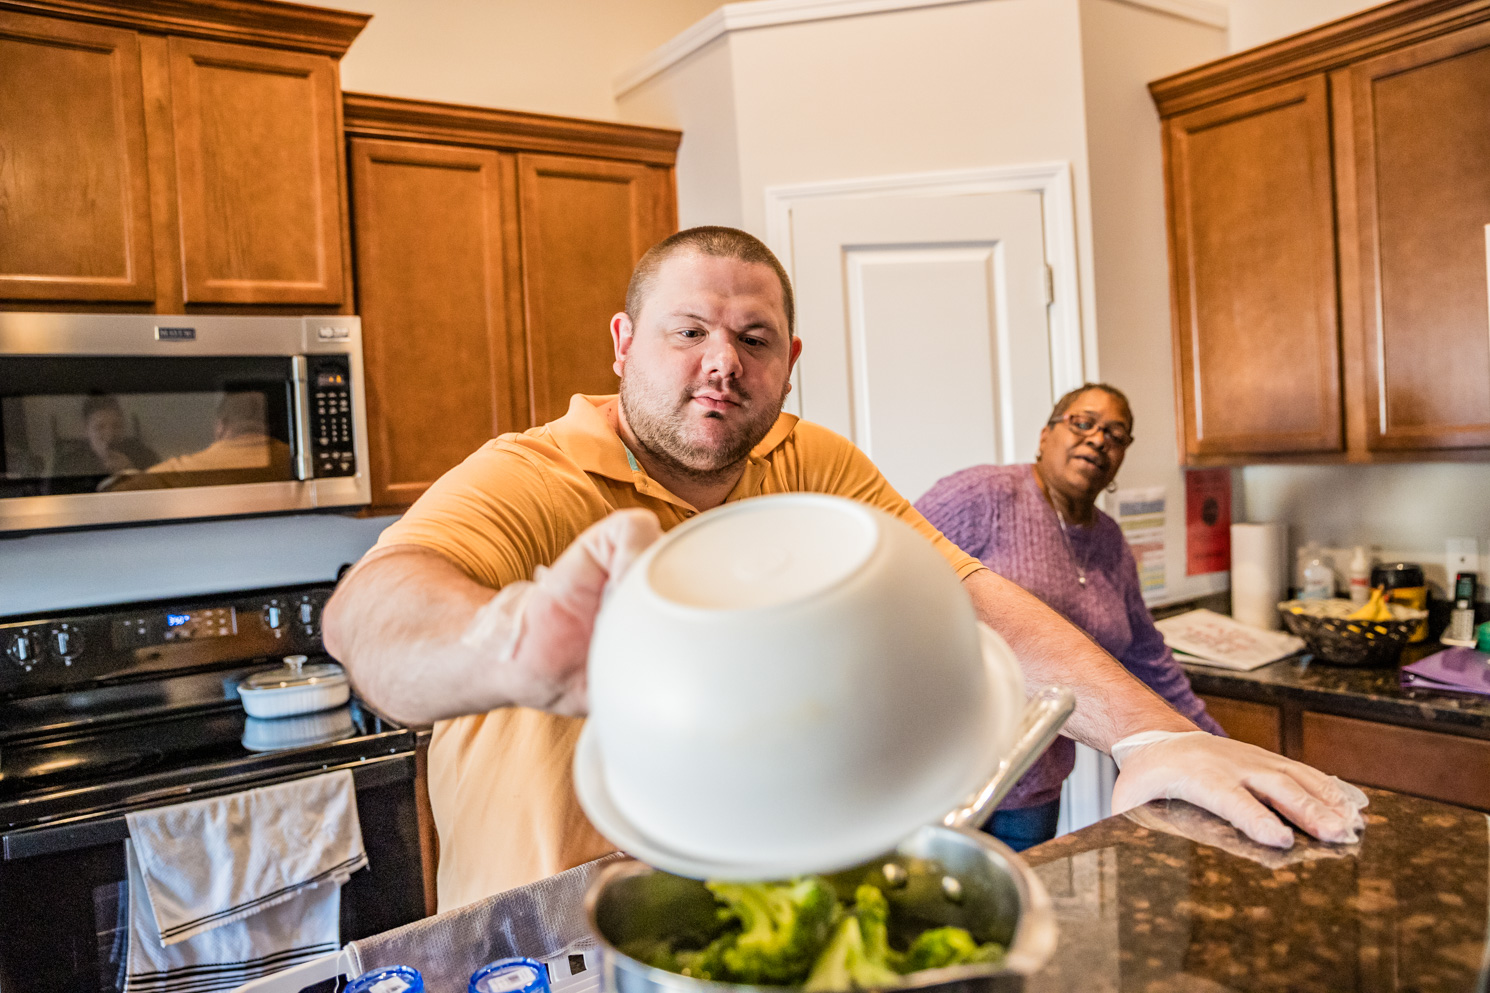 A residential services volunteer assists a Unity Bay member in the kitchen while both are cooking.